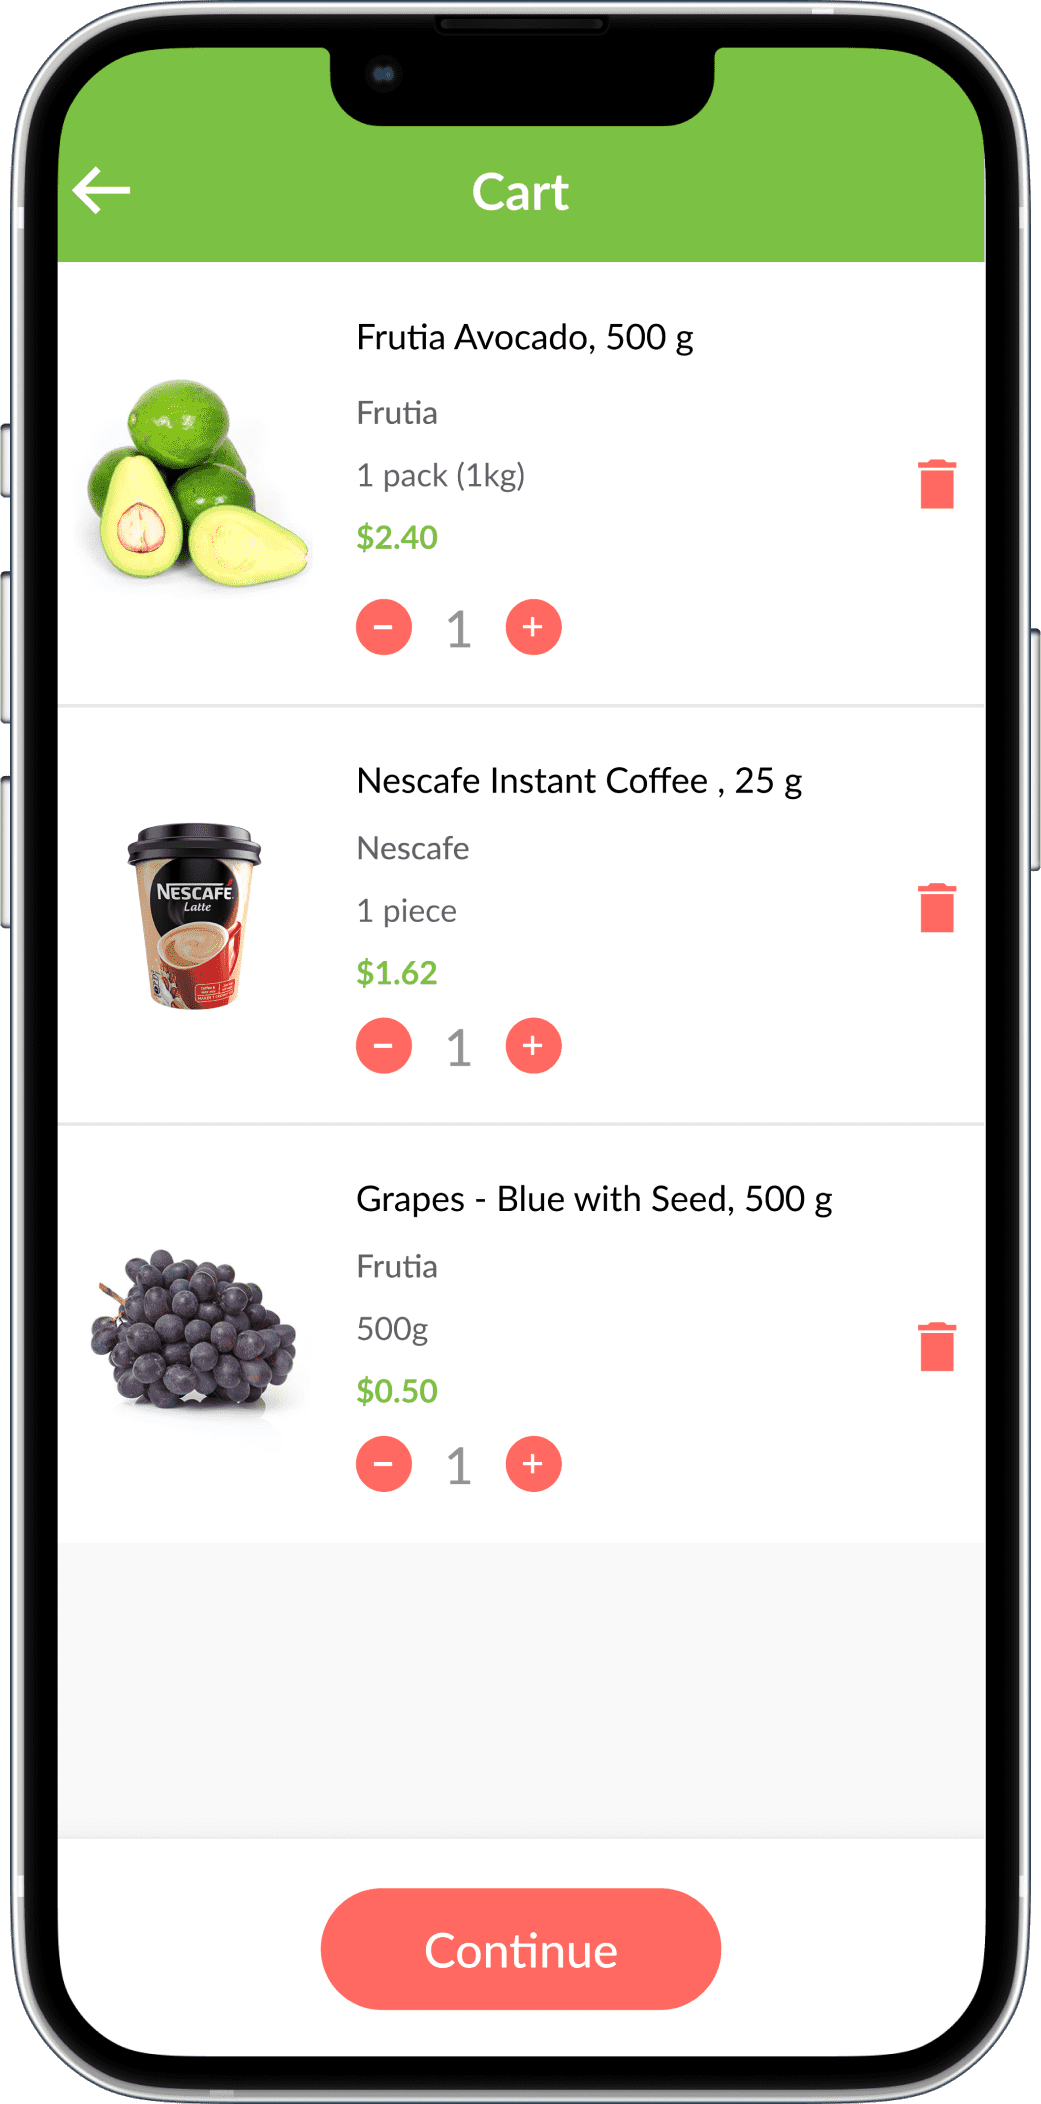 online grocery delivery app cart screen